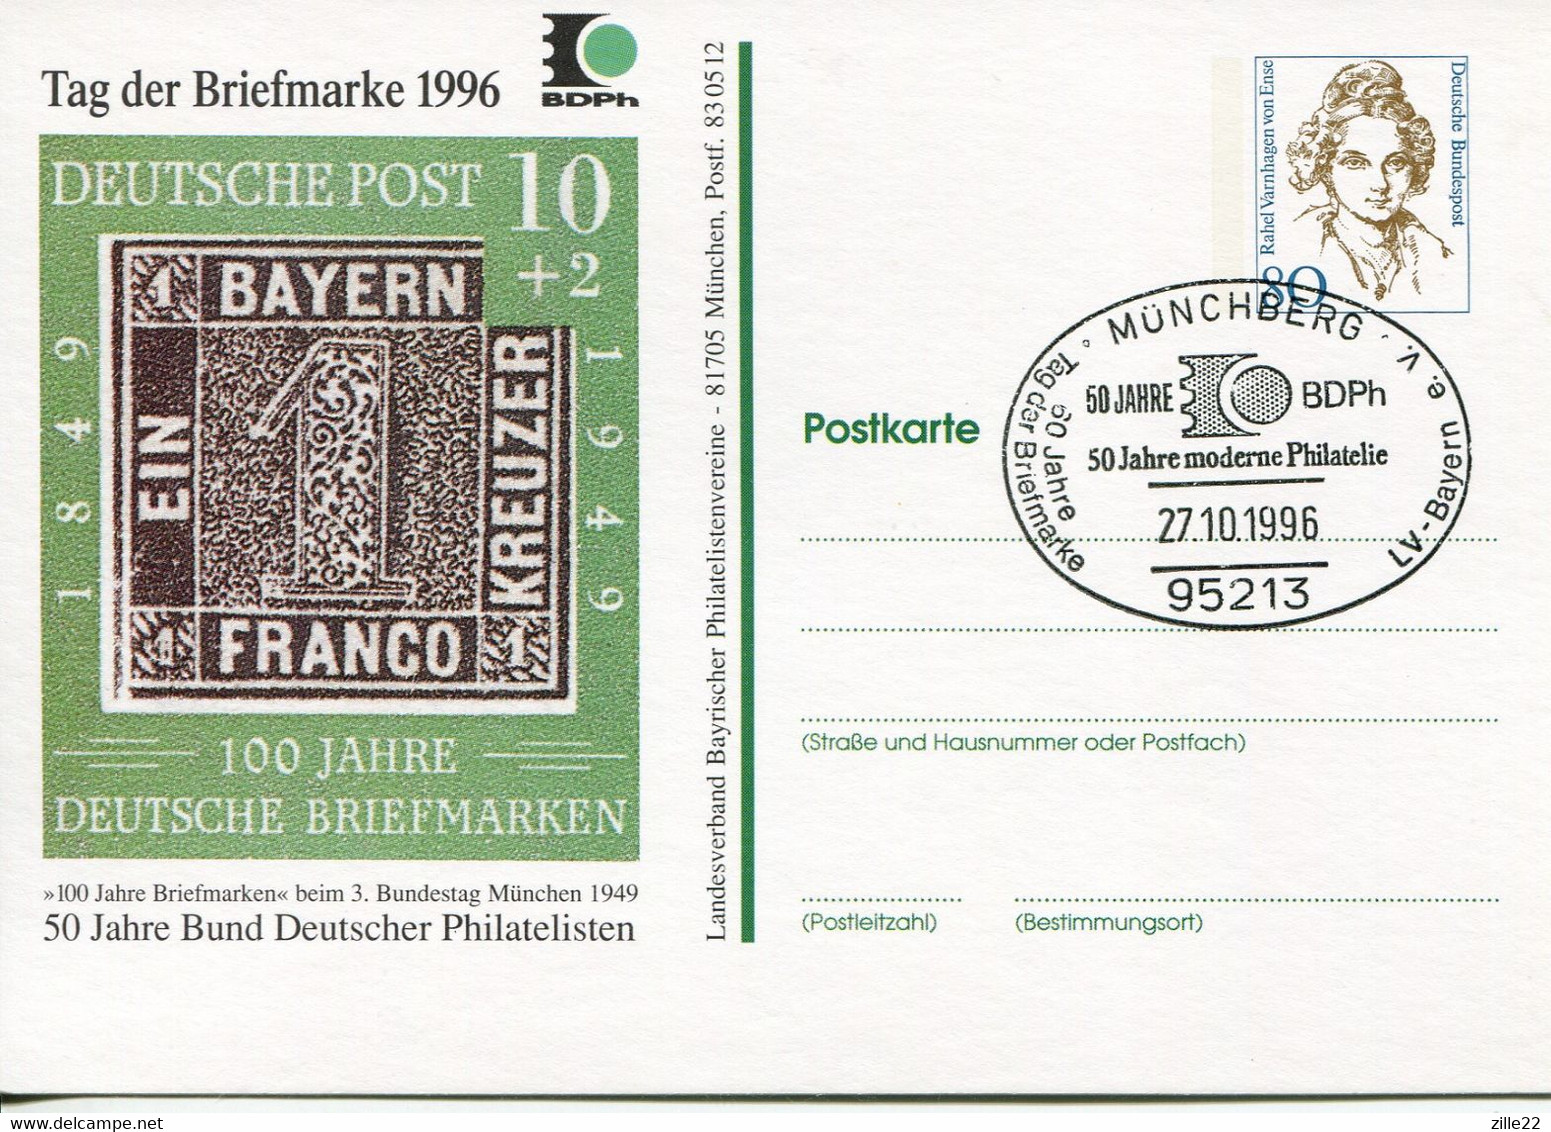 Germany Deutschland postal stationery - private card - CTO - von Ense design - stamp day, 50th collectors union jubilee